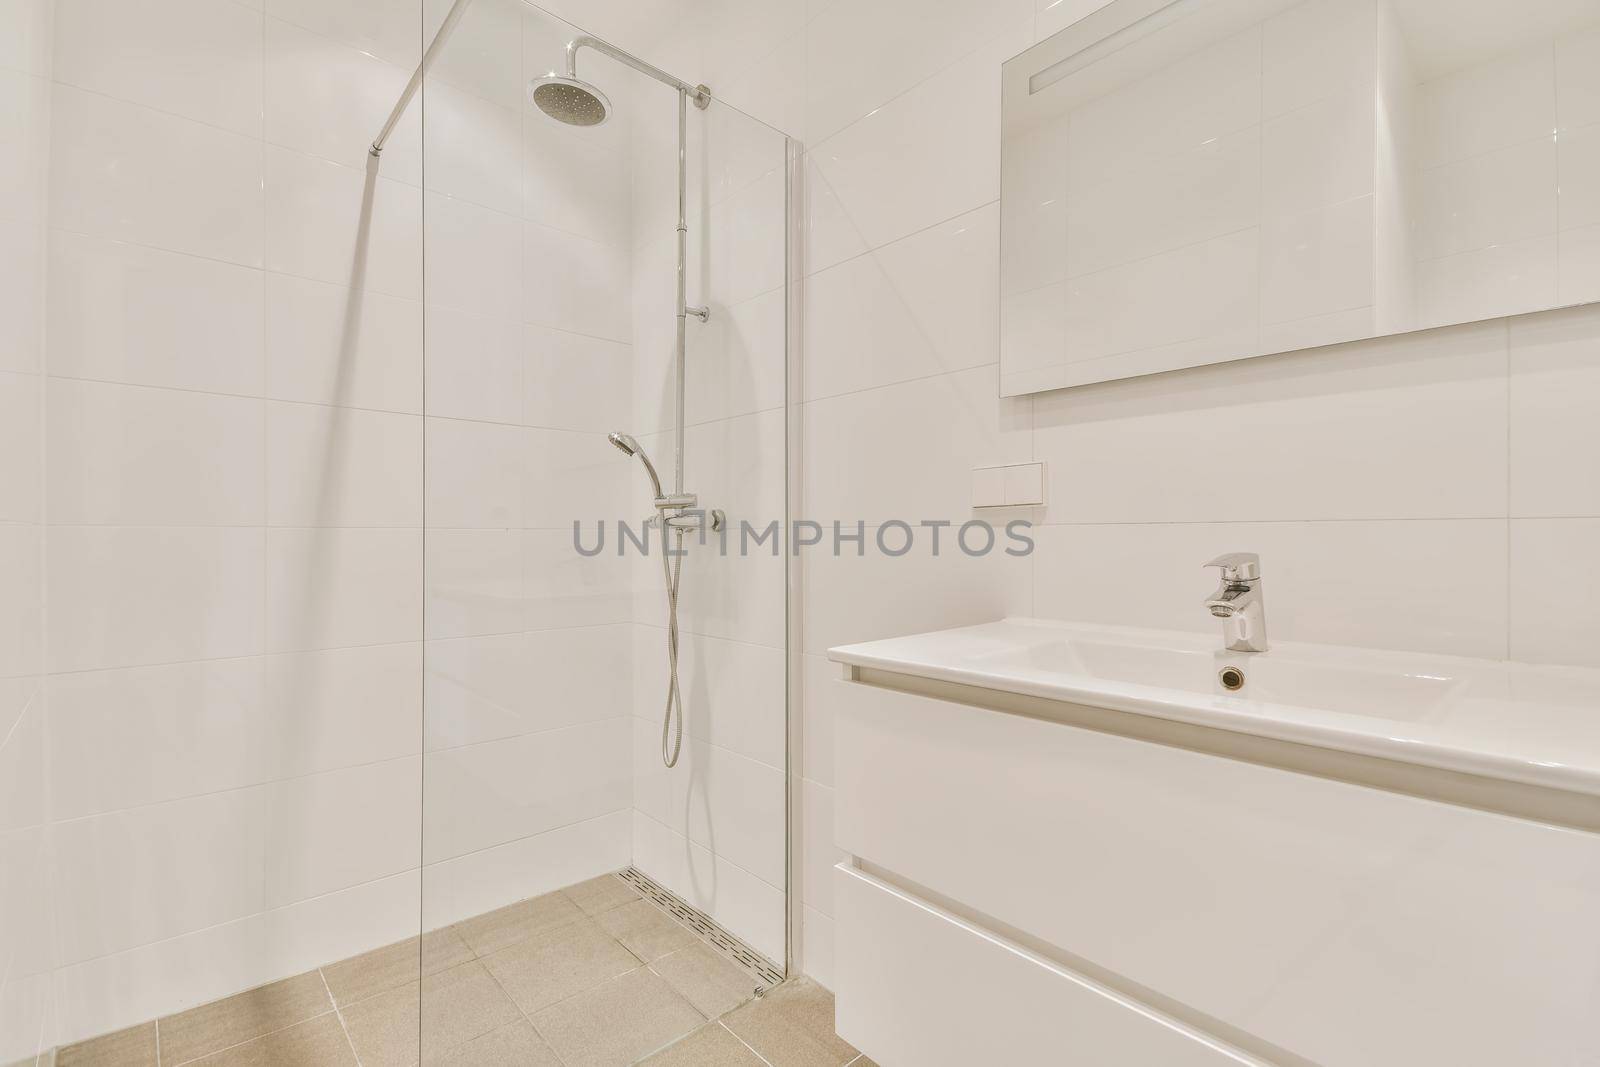 Bathroom interior with hanging chest of drawers and shower cubicle with glass partition